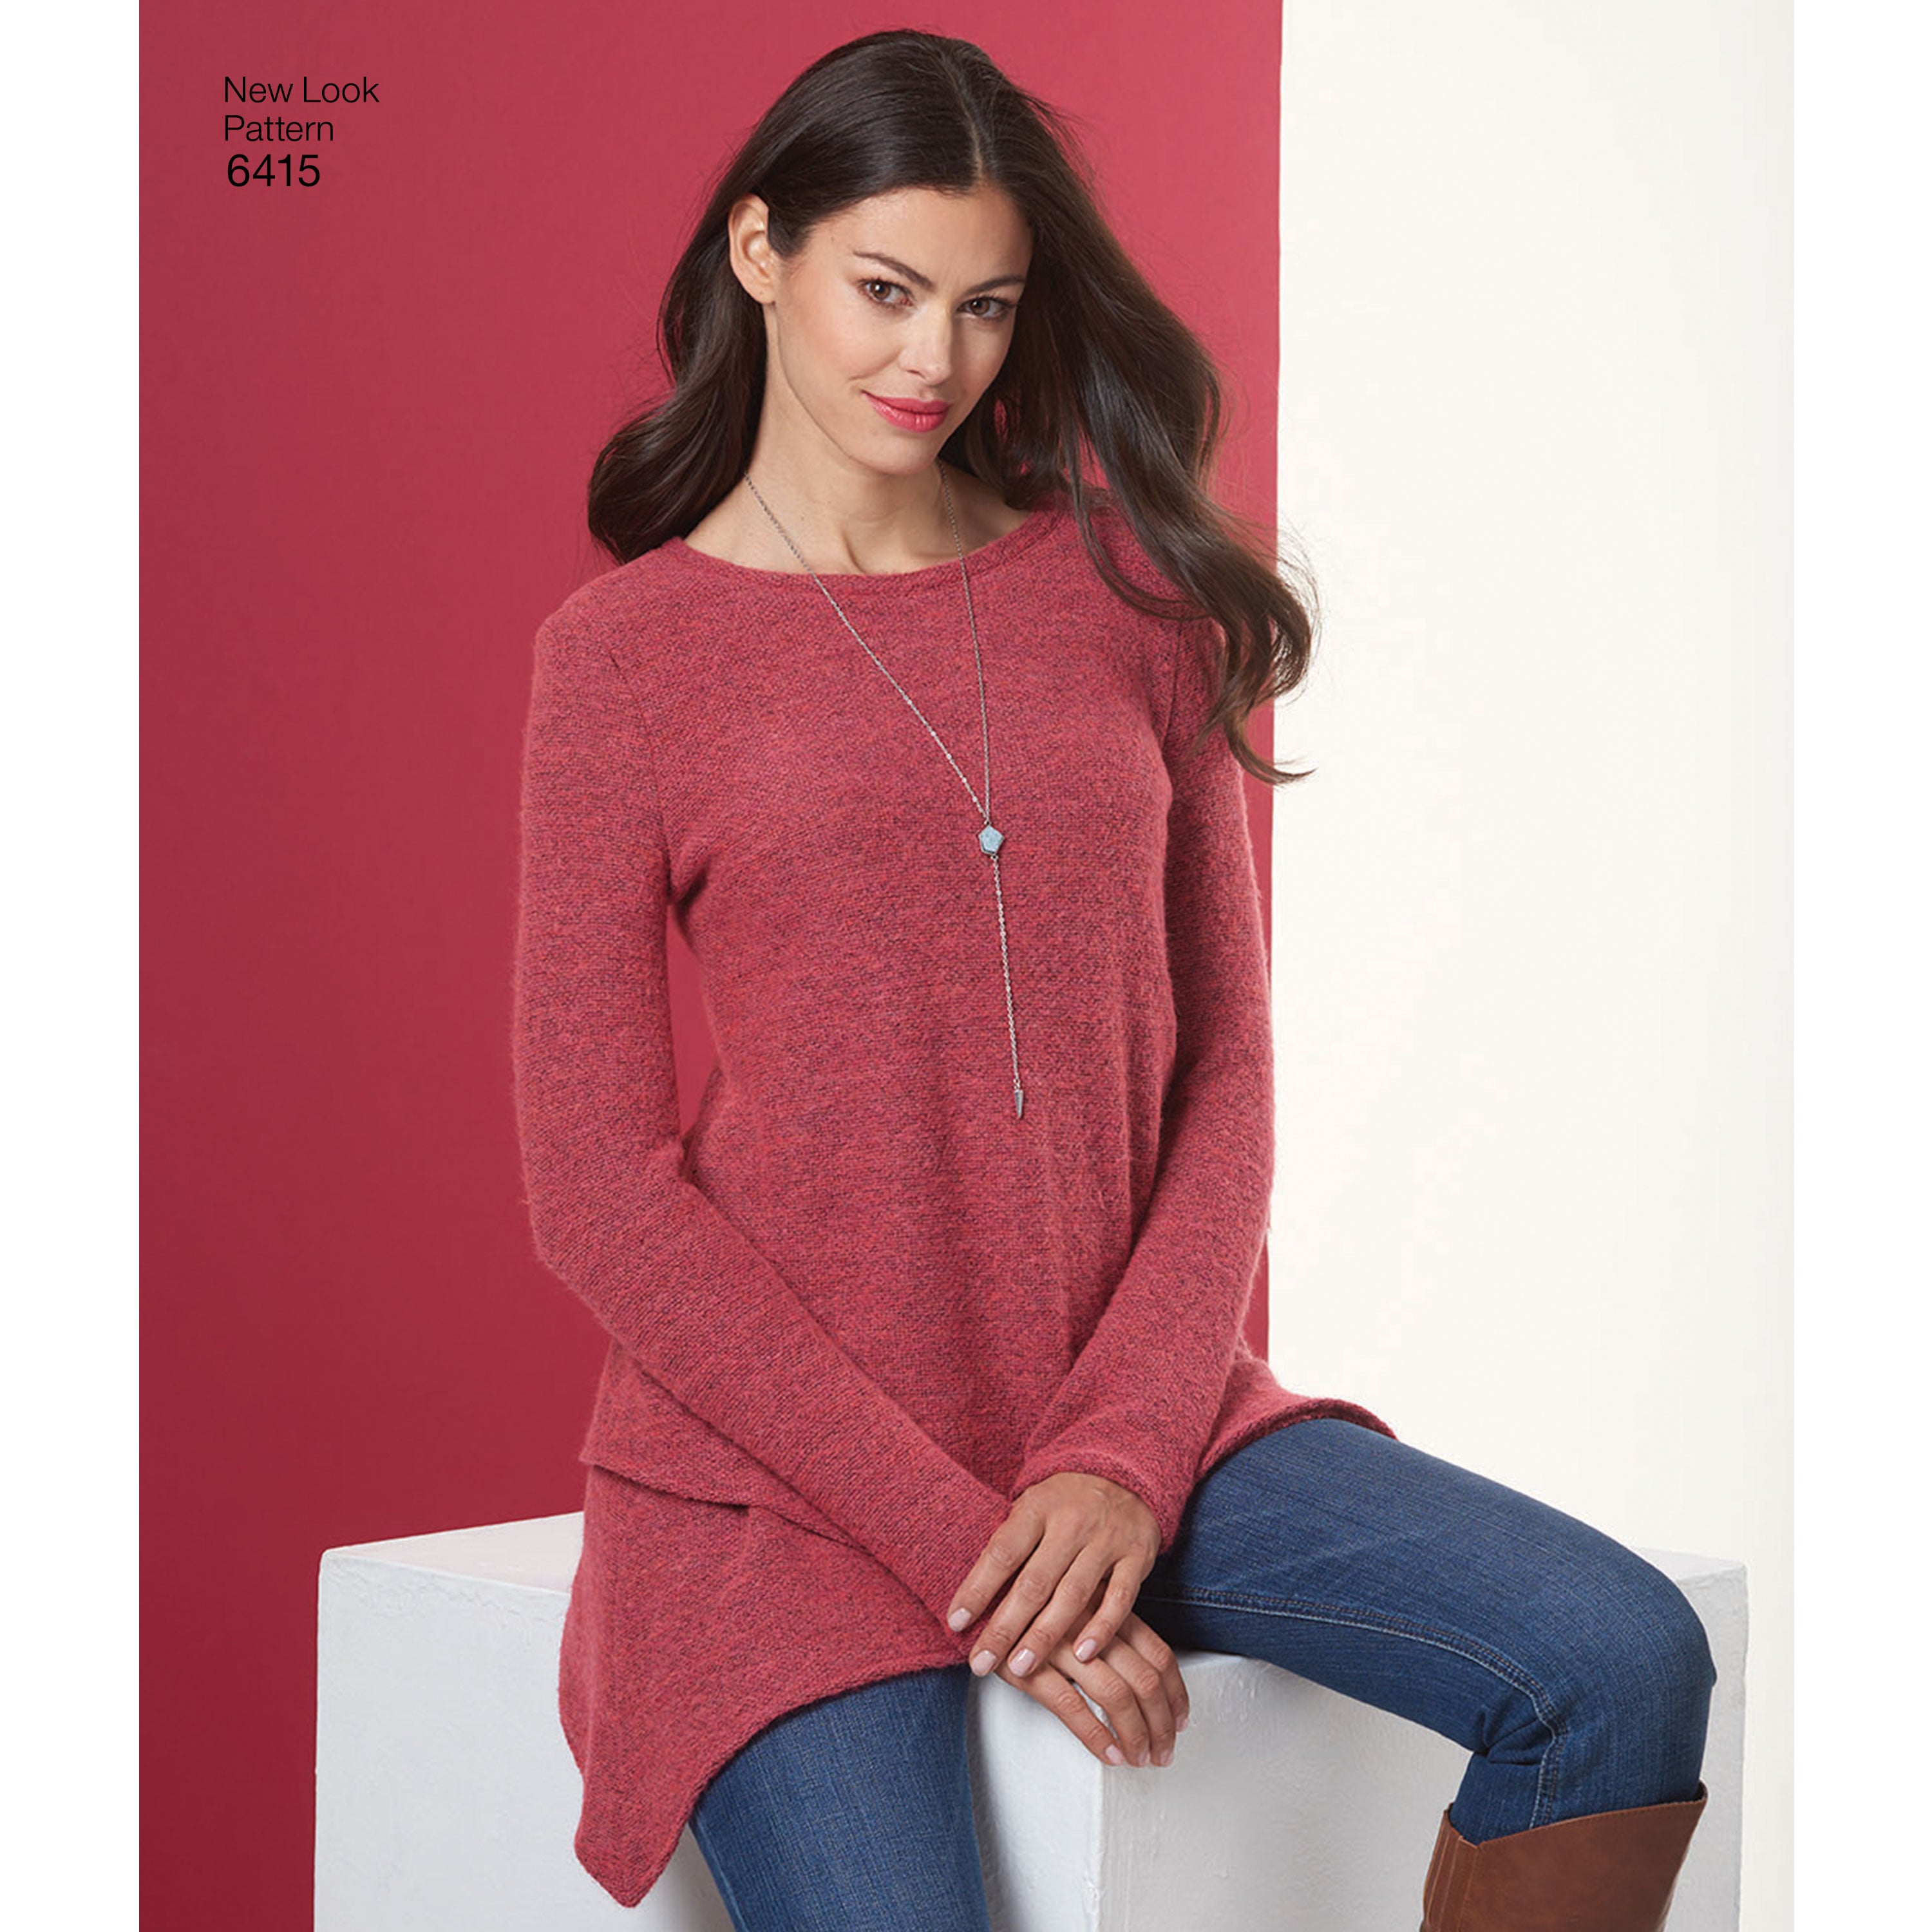 NL6415 Misses' Knit Tunics from Jaycotts Sewing Supplies